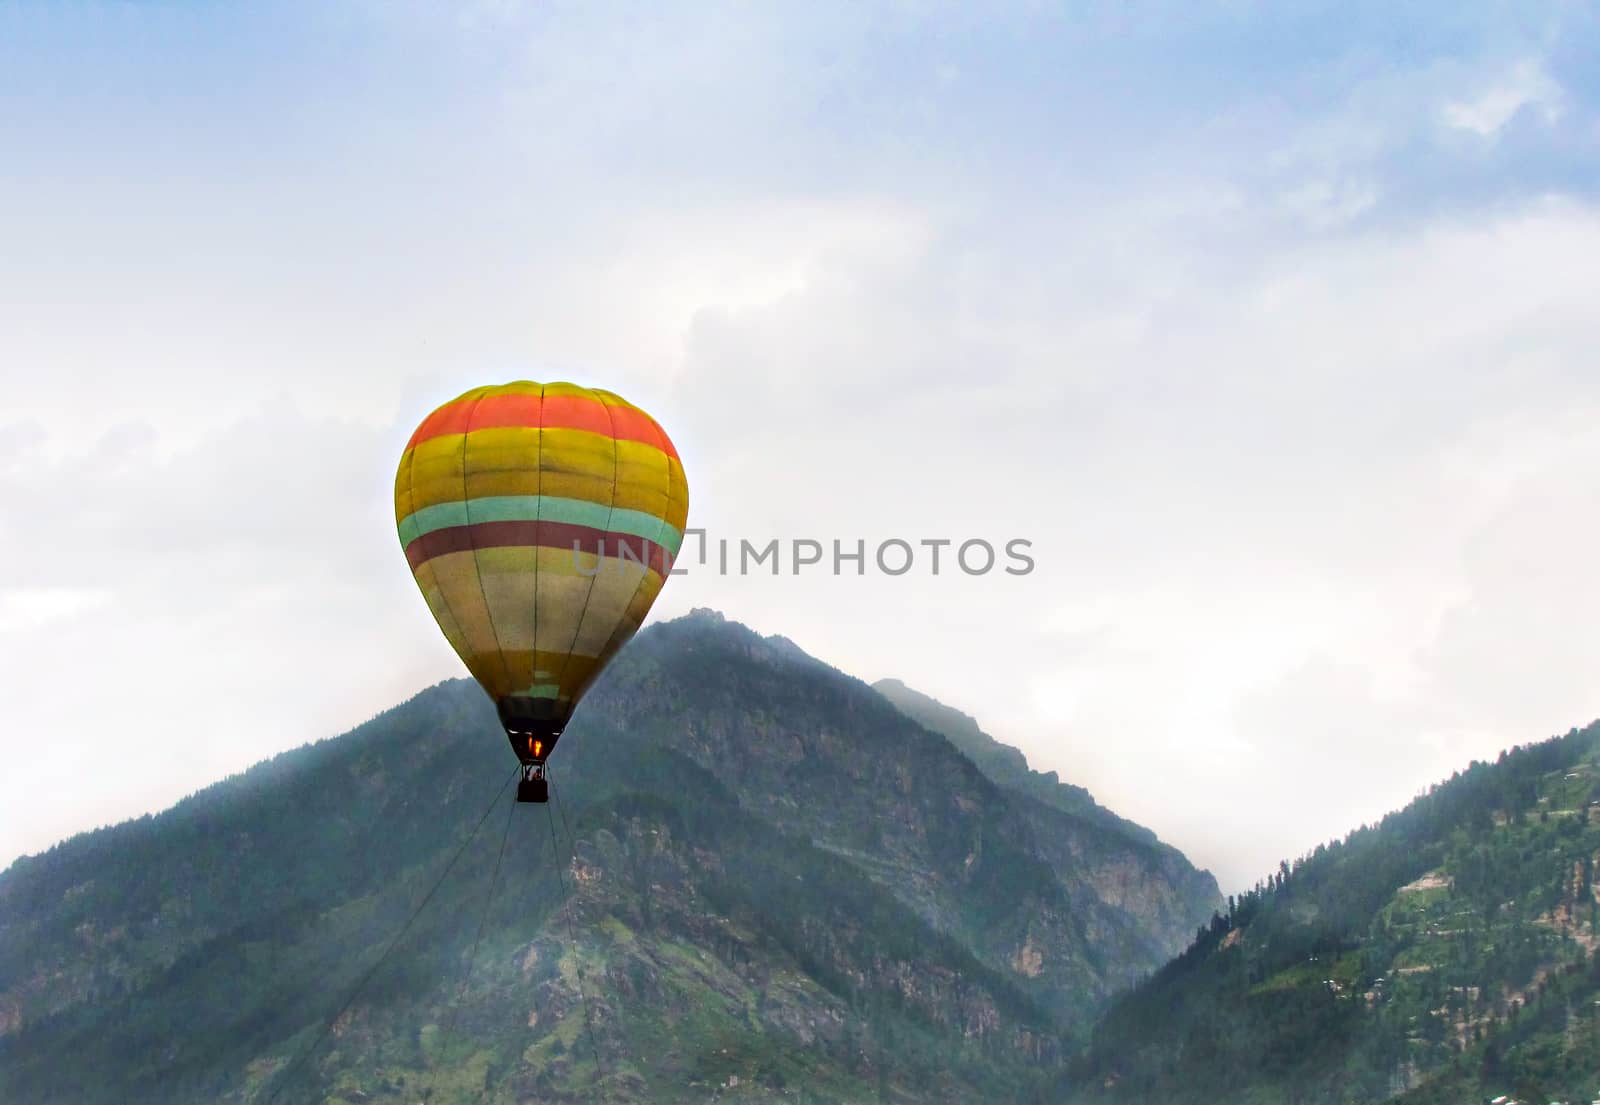 Isolated image of hot air balloon high in the air on a clear background of blue sky  in Manali, Himachal Pradesh, India.